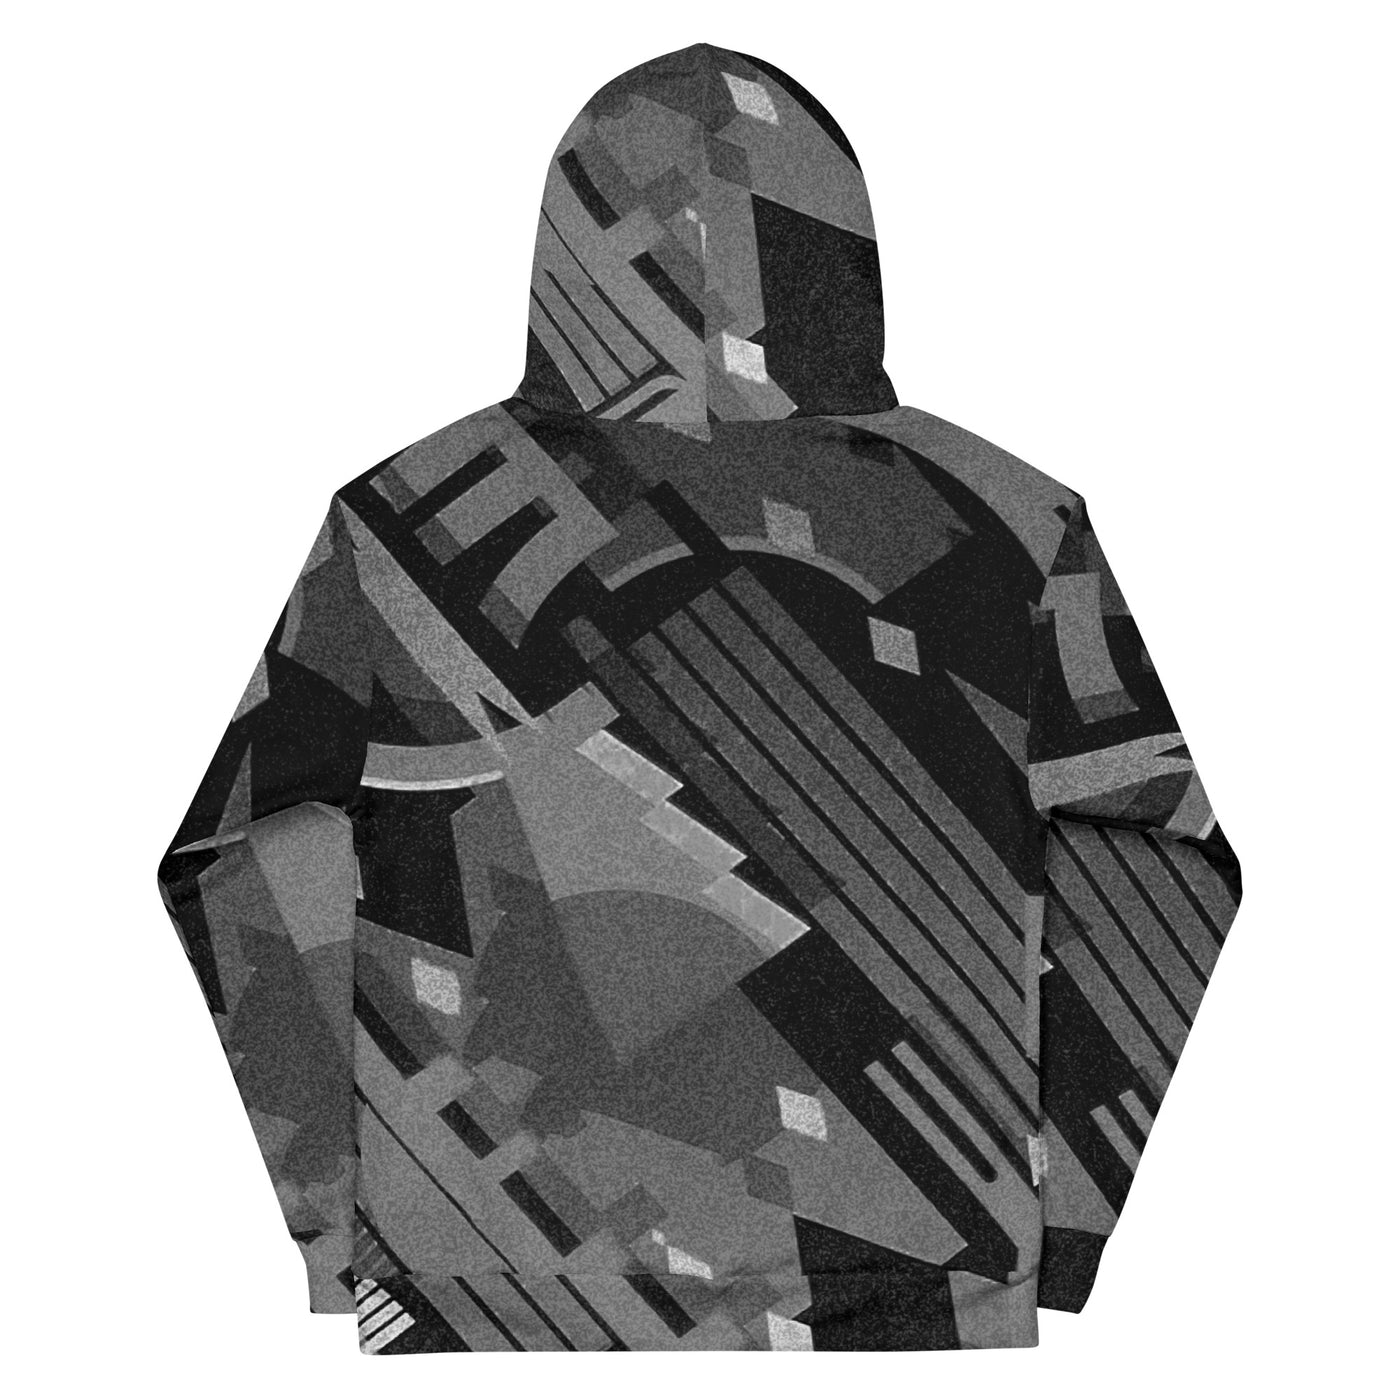 TechAbstract 1 in black & white- Hoodie